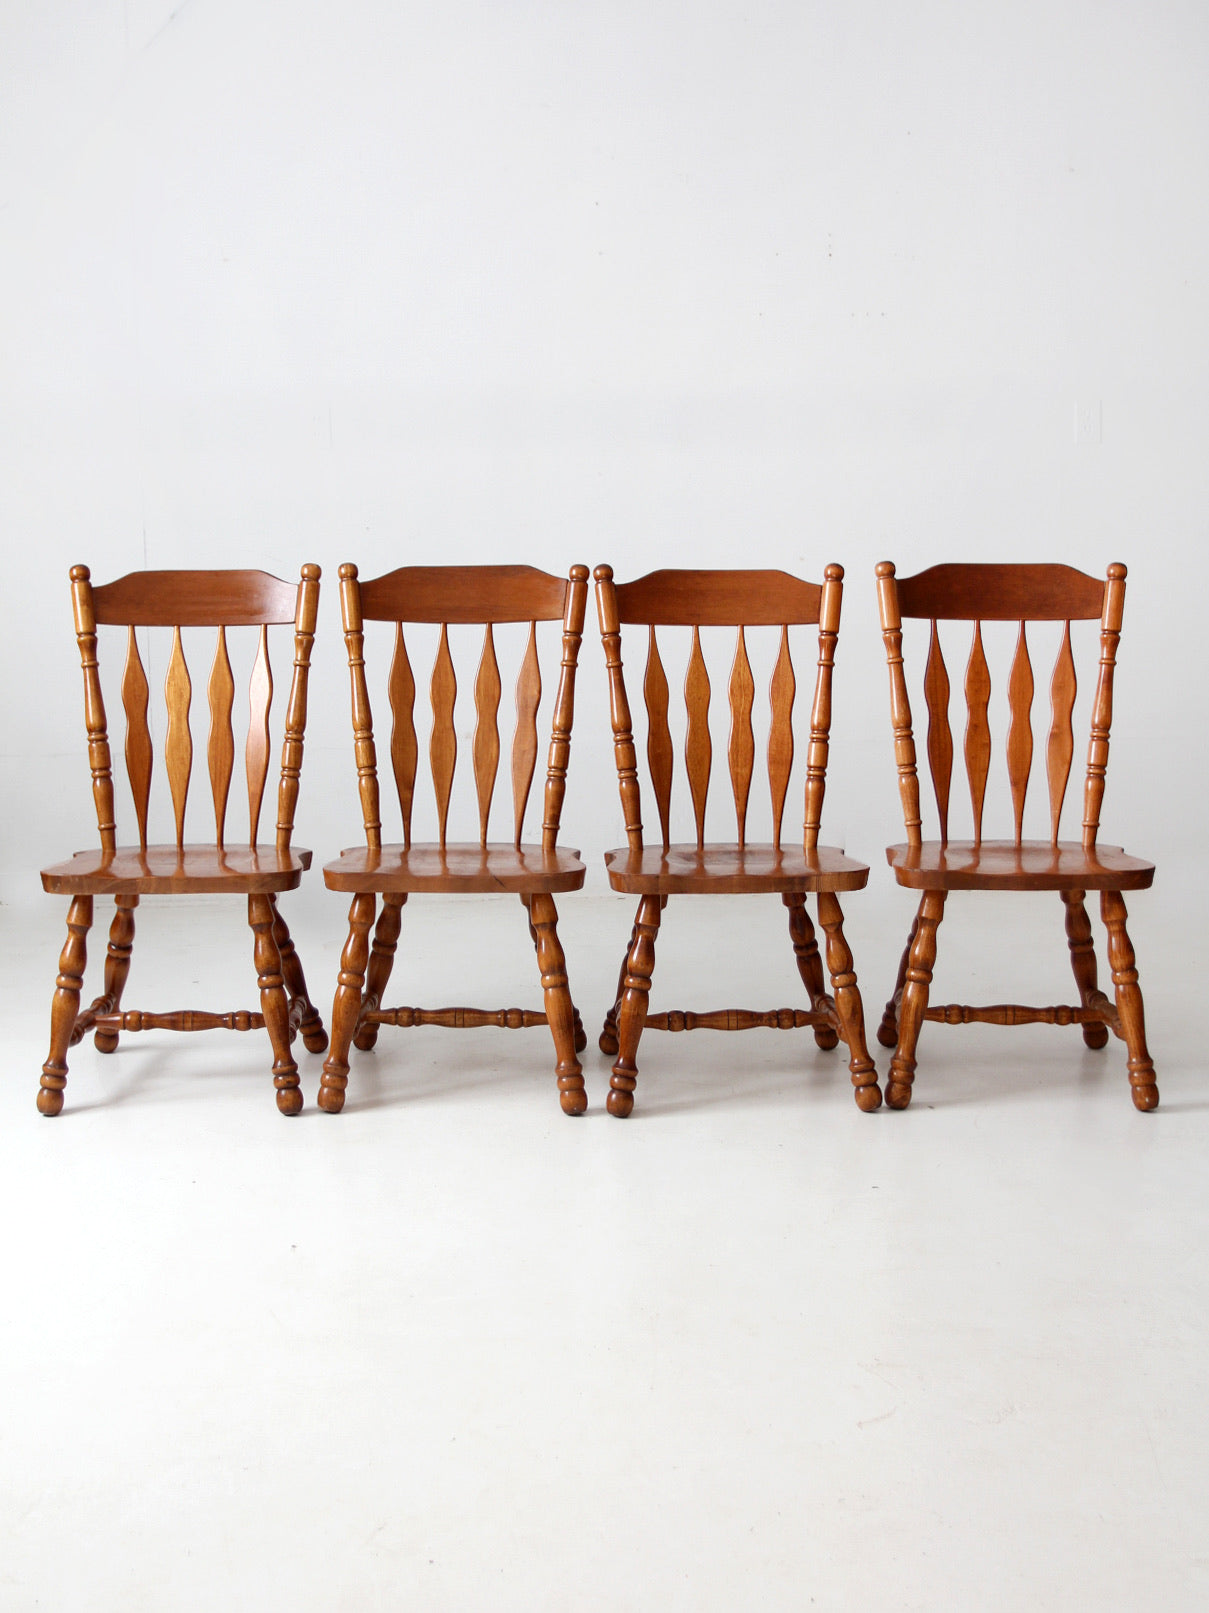 vintage oak dining chairs set of 4